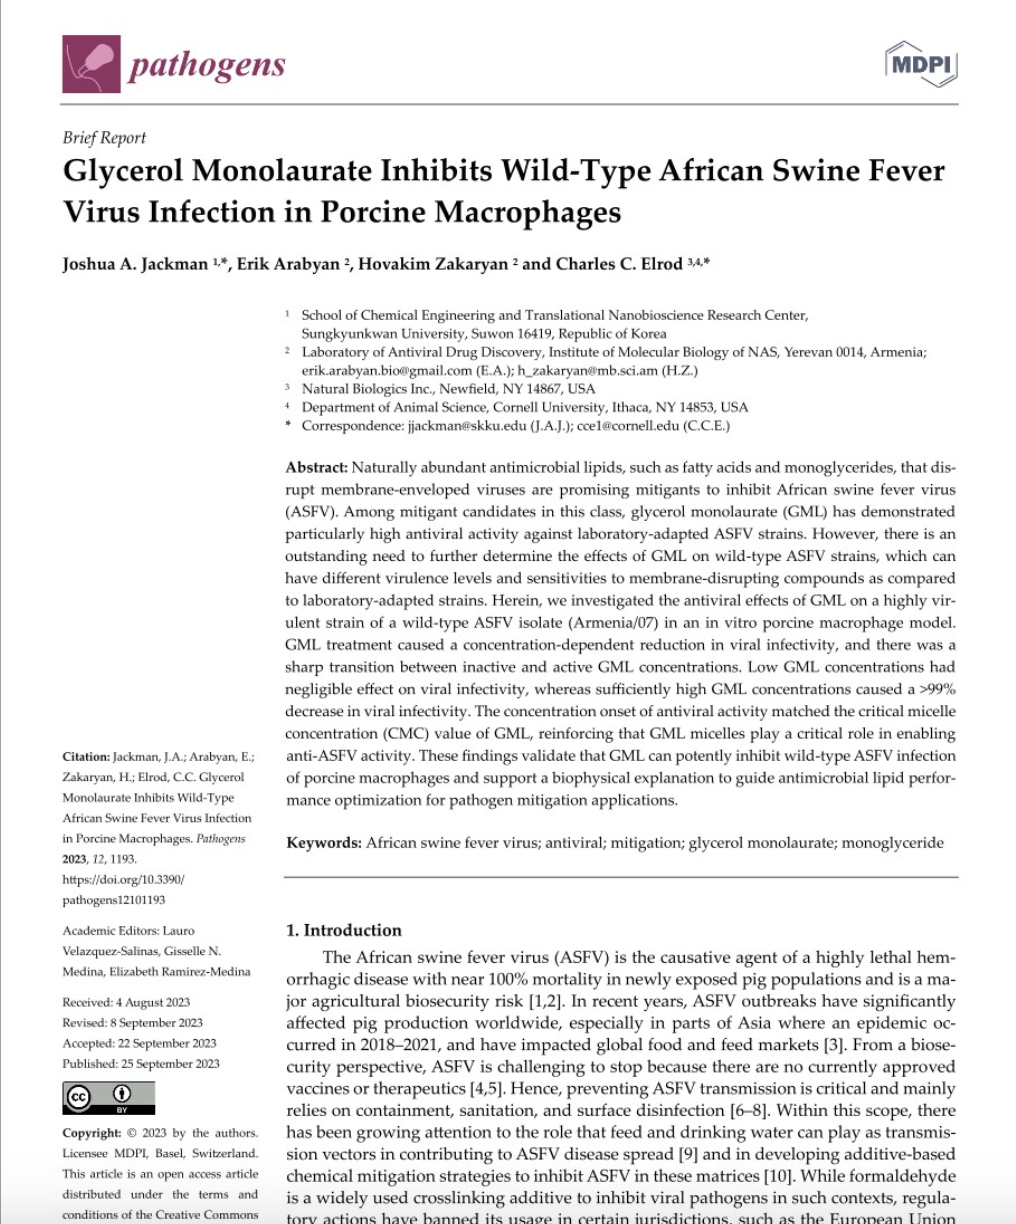 New GML Research with Wild-Type African Swine Fever Virus Published